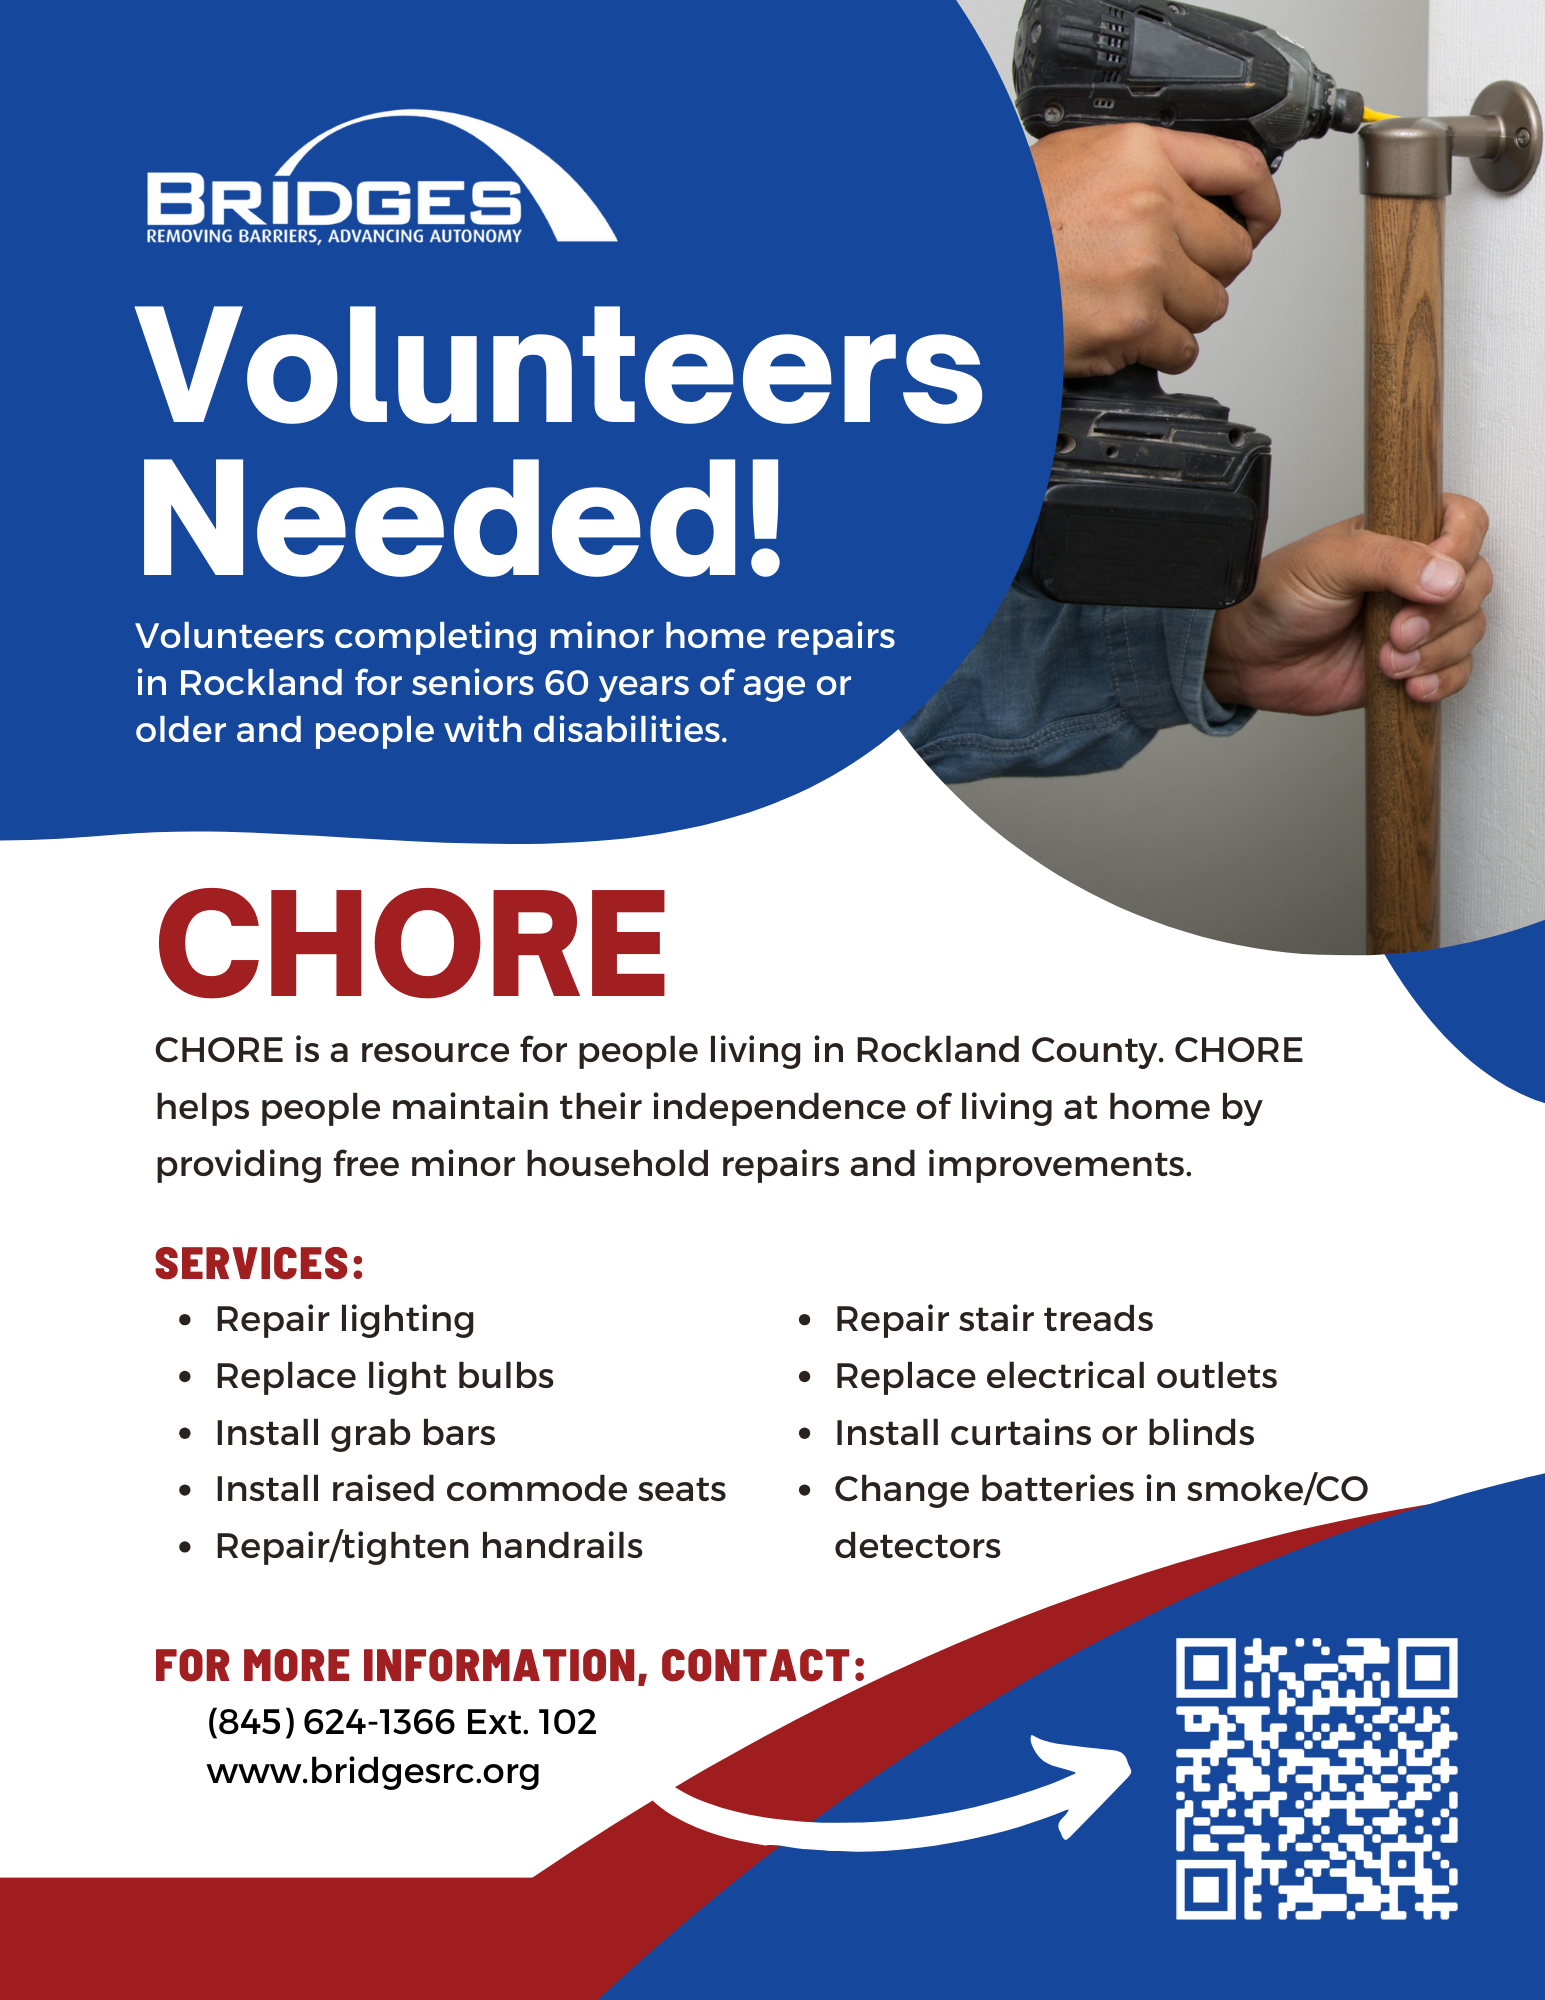 Volunteers needed for completing minor home repairs in Rockland for seniors 60 years of age or older and people with disabilities. Chore is a resource for people living in Rockland County. Chore helps people maintain their independence of living at home by providing free minor household repairs and improvements. Services include: repair lighting, replace light bulbs, install grab bars, install raised commode seats, repair and tighten handrails, repair stair treads, replace electrical outlets, install curtains or blinds, change batteries in smoke and CO detectors. For more information, contact 845-624-1366 extension 102.